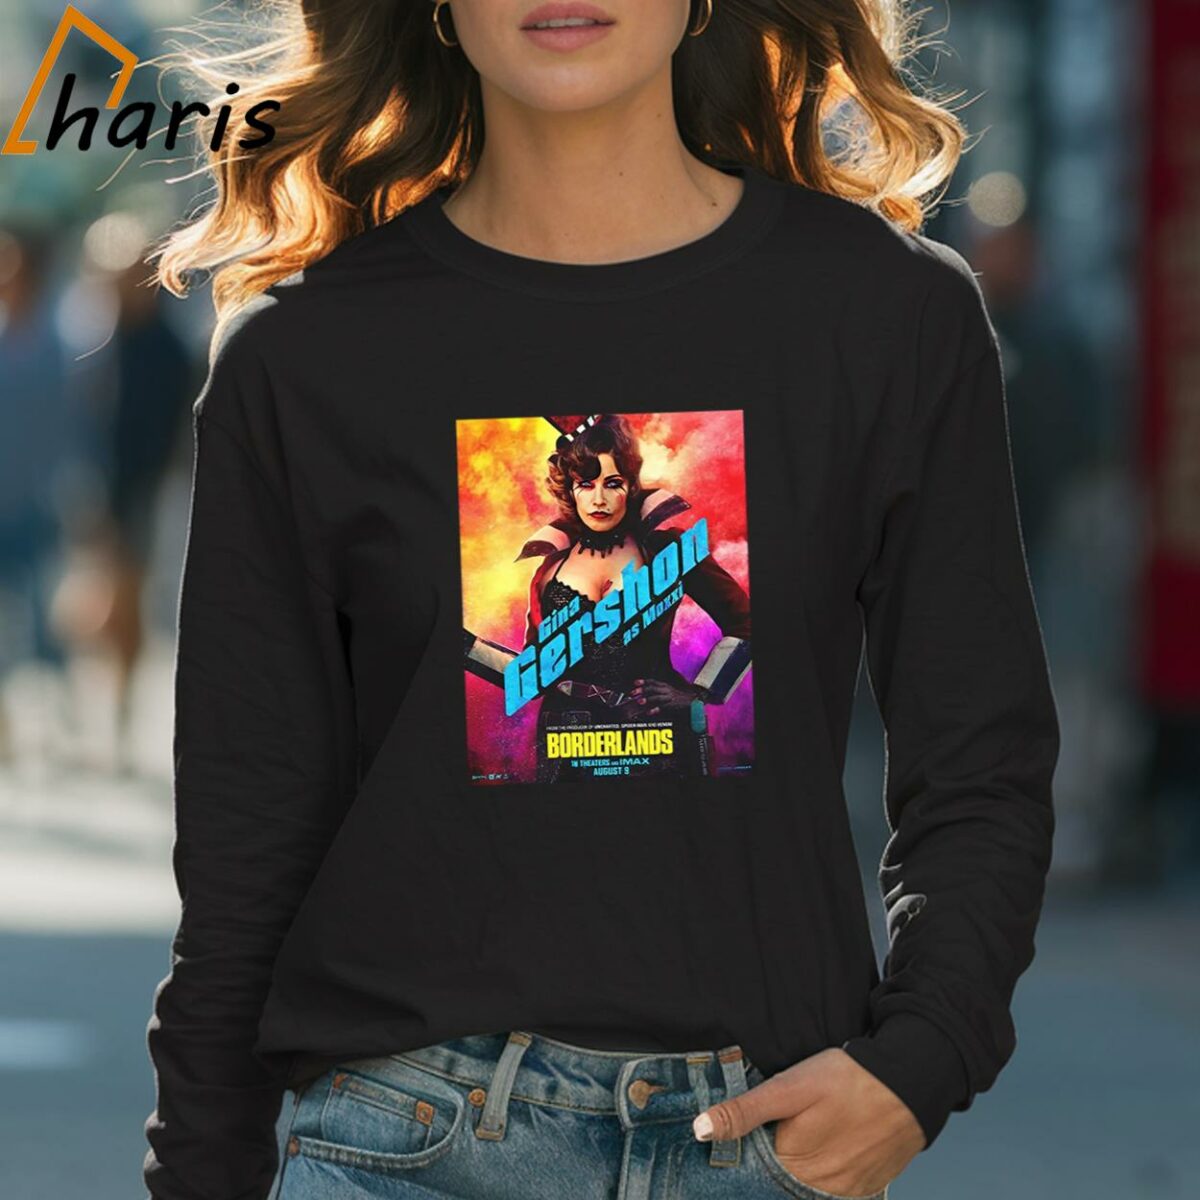 New Character Moxxi Posters For Borderlands Releasing In Theaters And IMAX On August 9 Unisex T Shirt 4 Long sleeve shirt